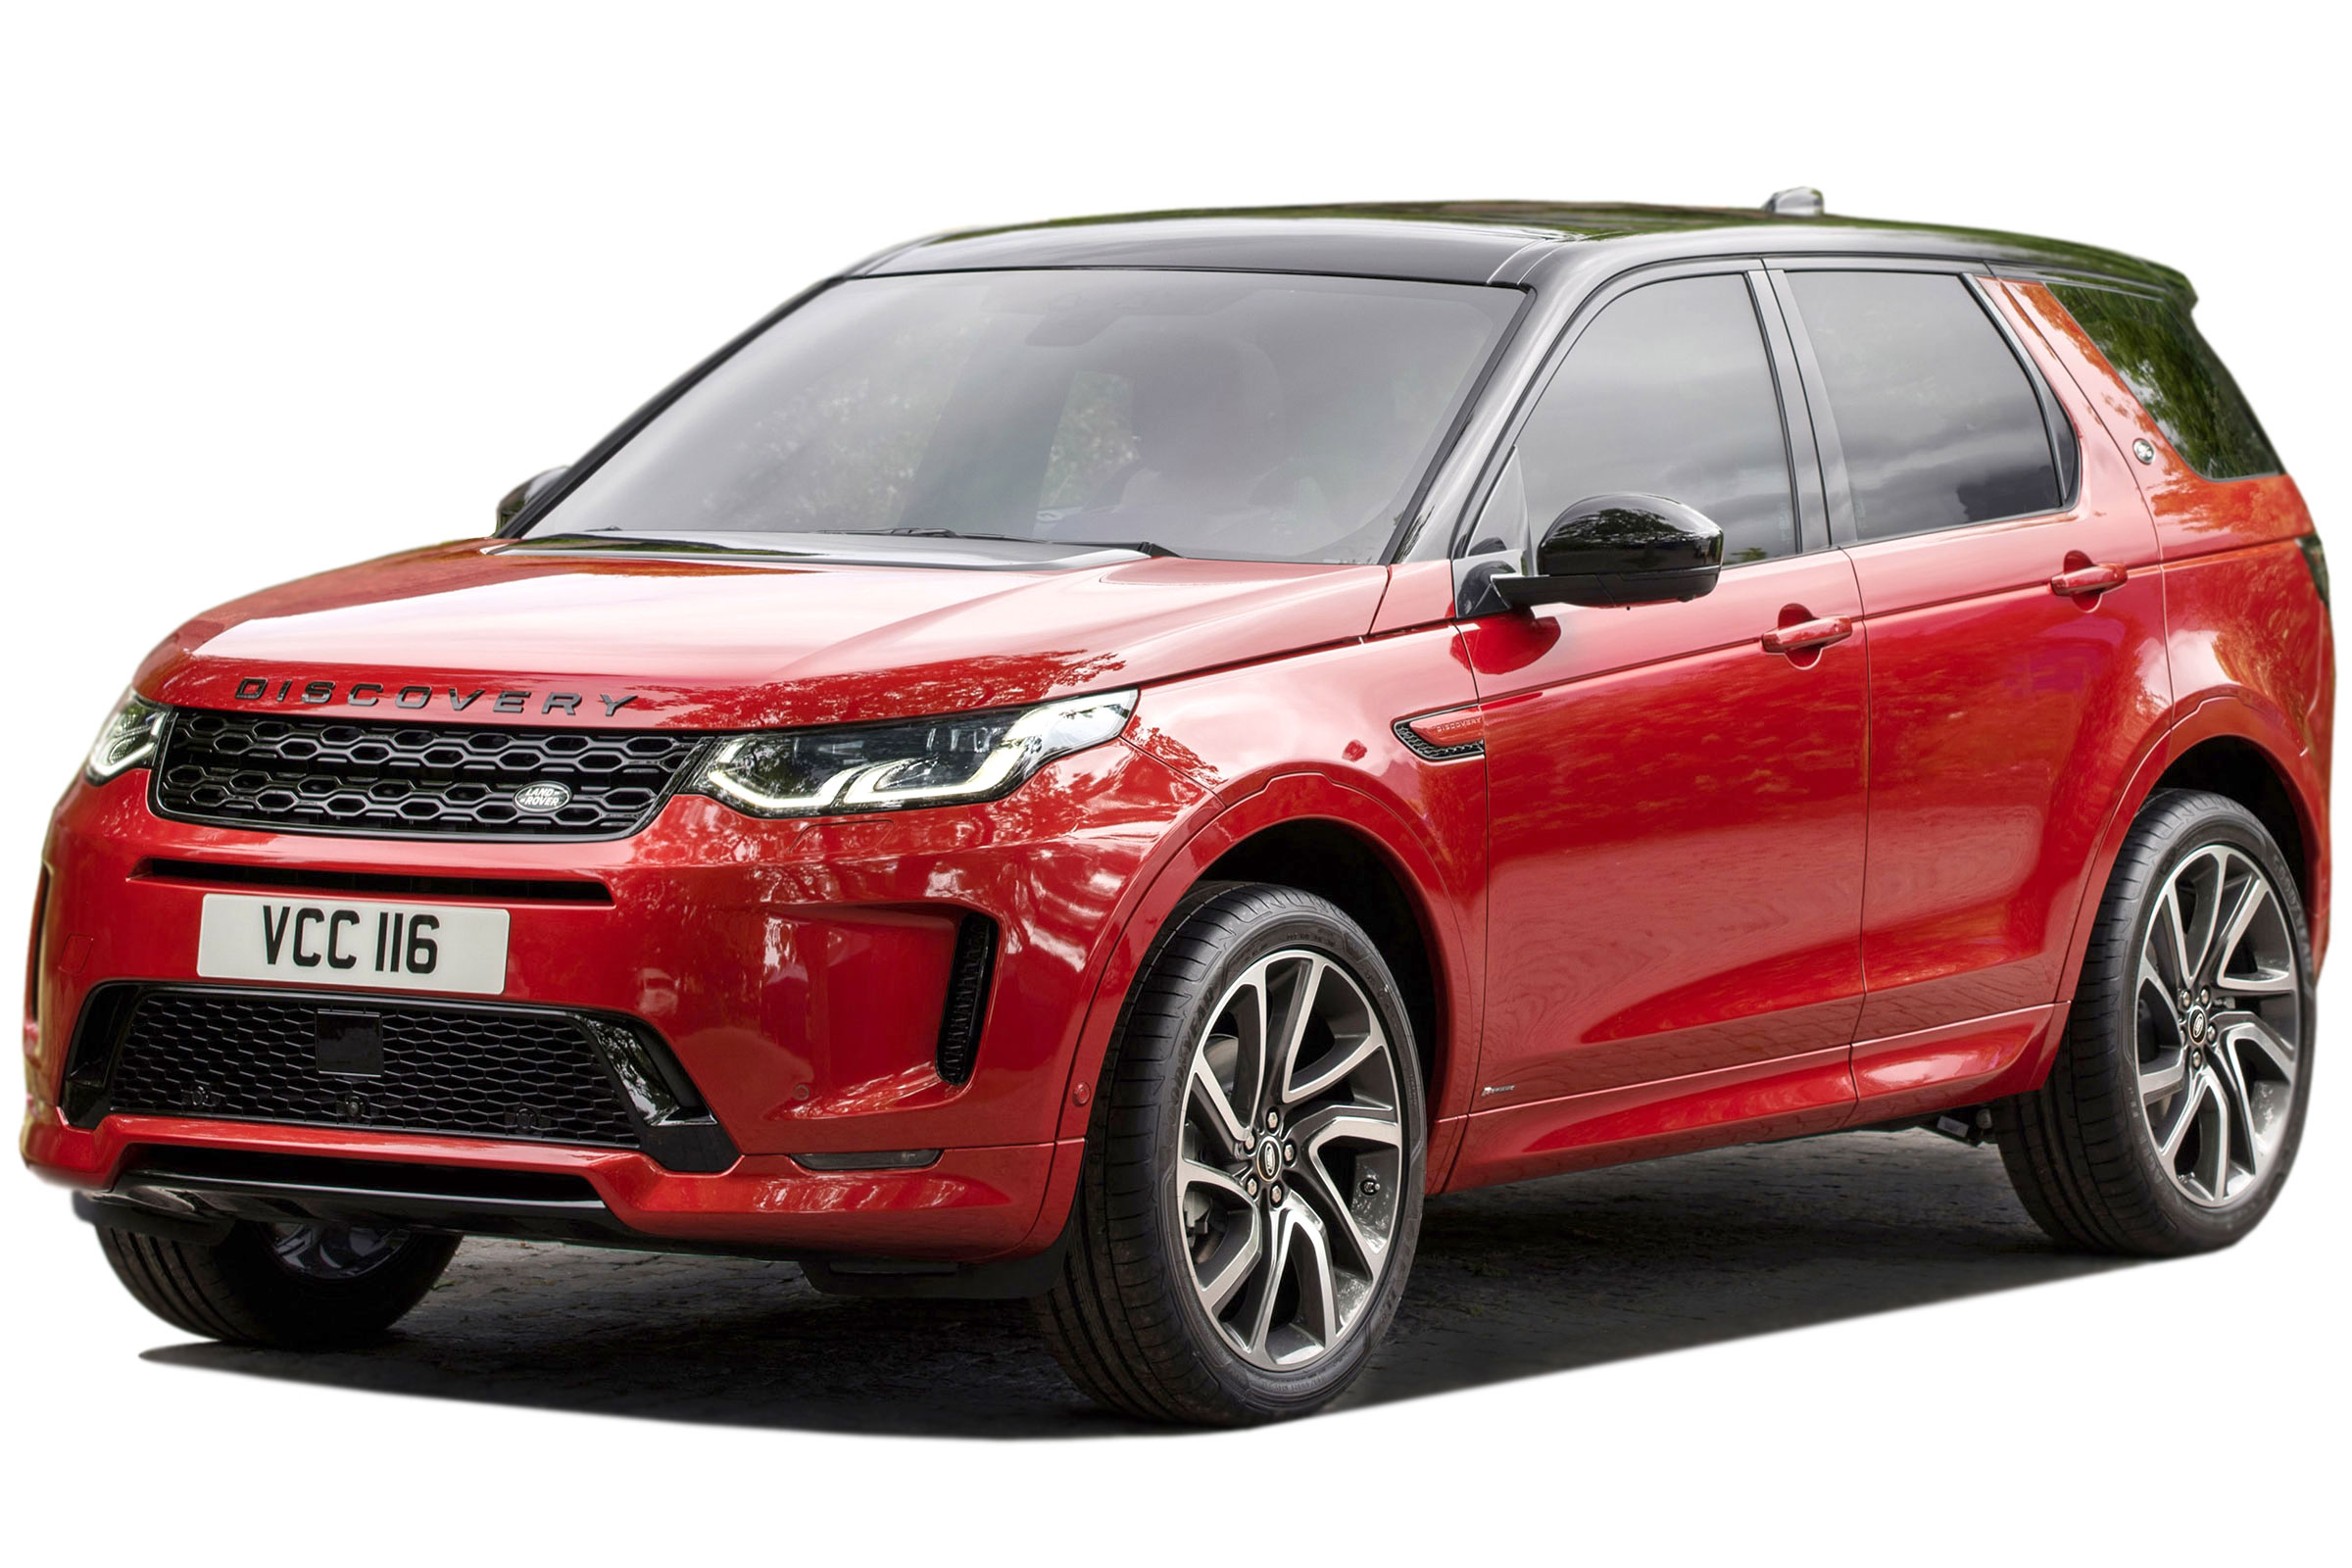 2021 Land Rover Discovery Release Date, Price and Changes